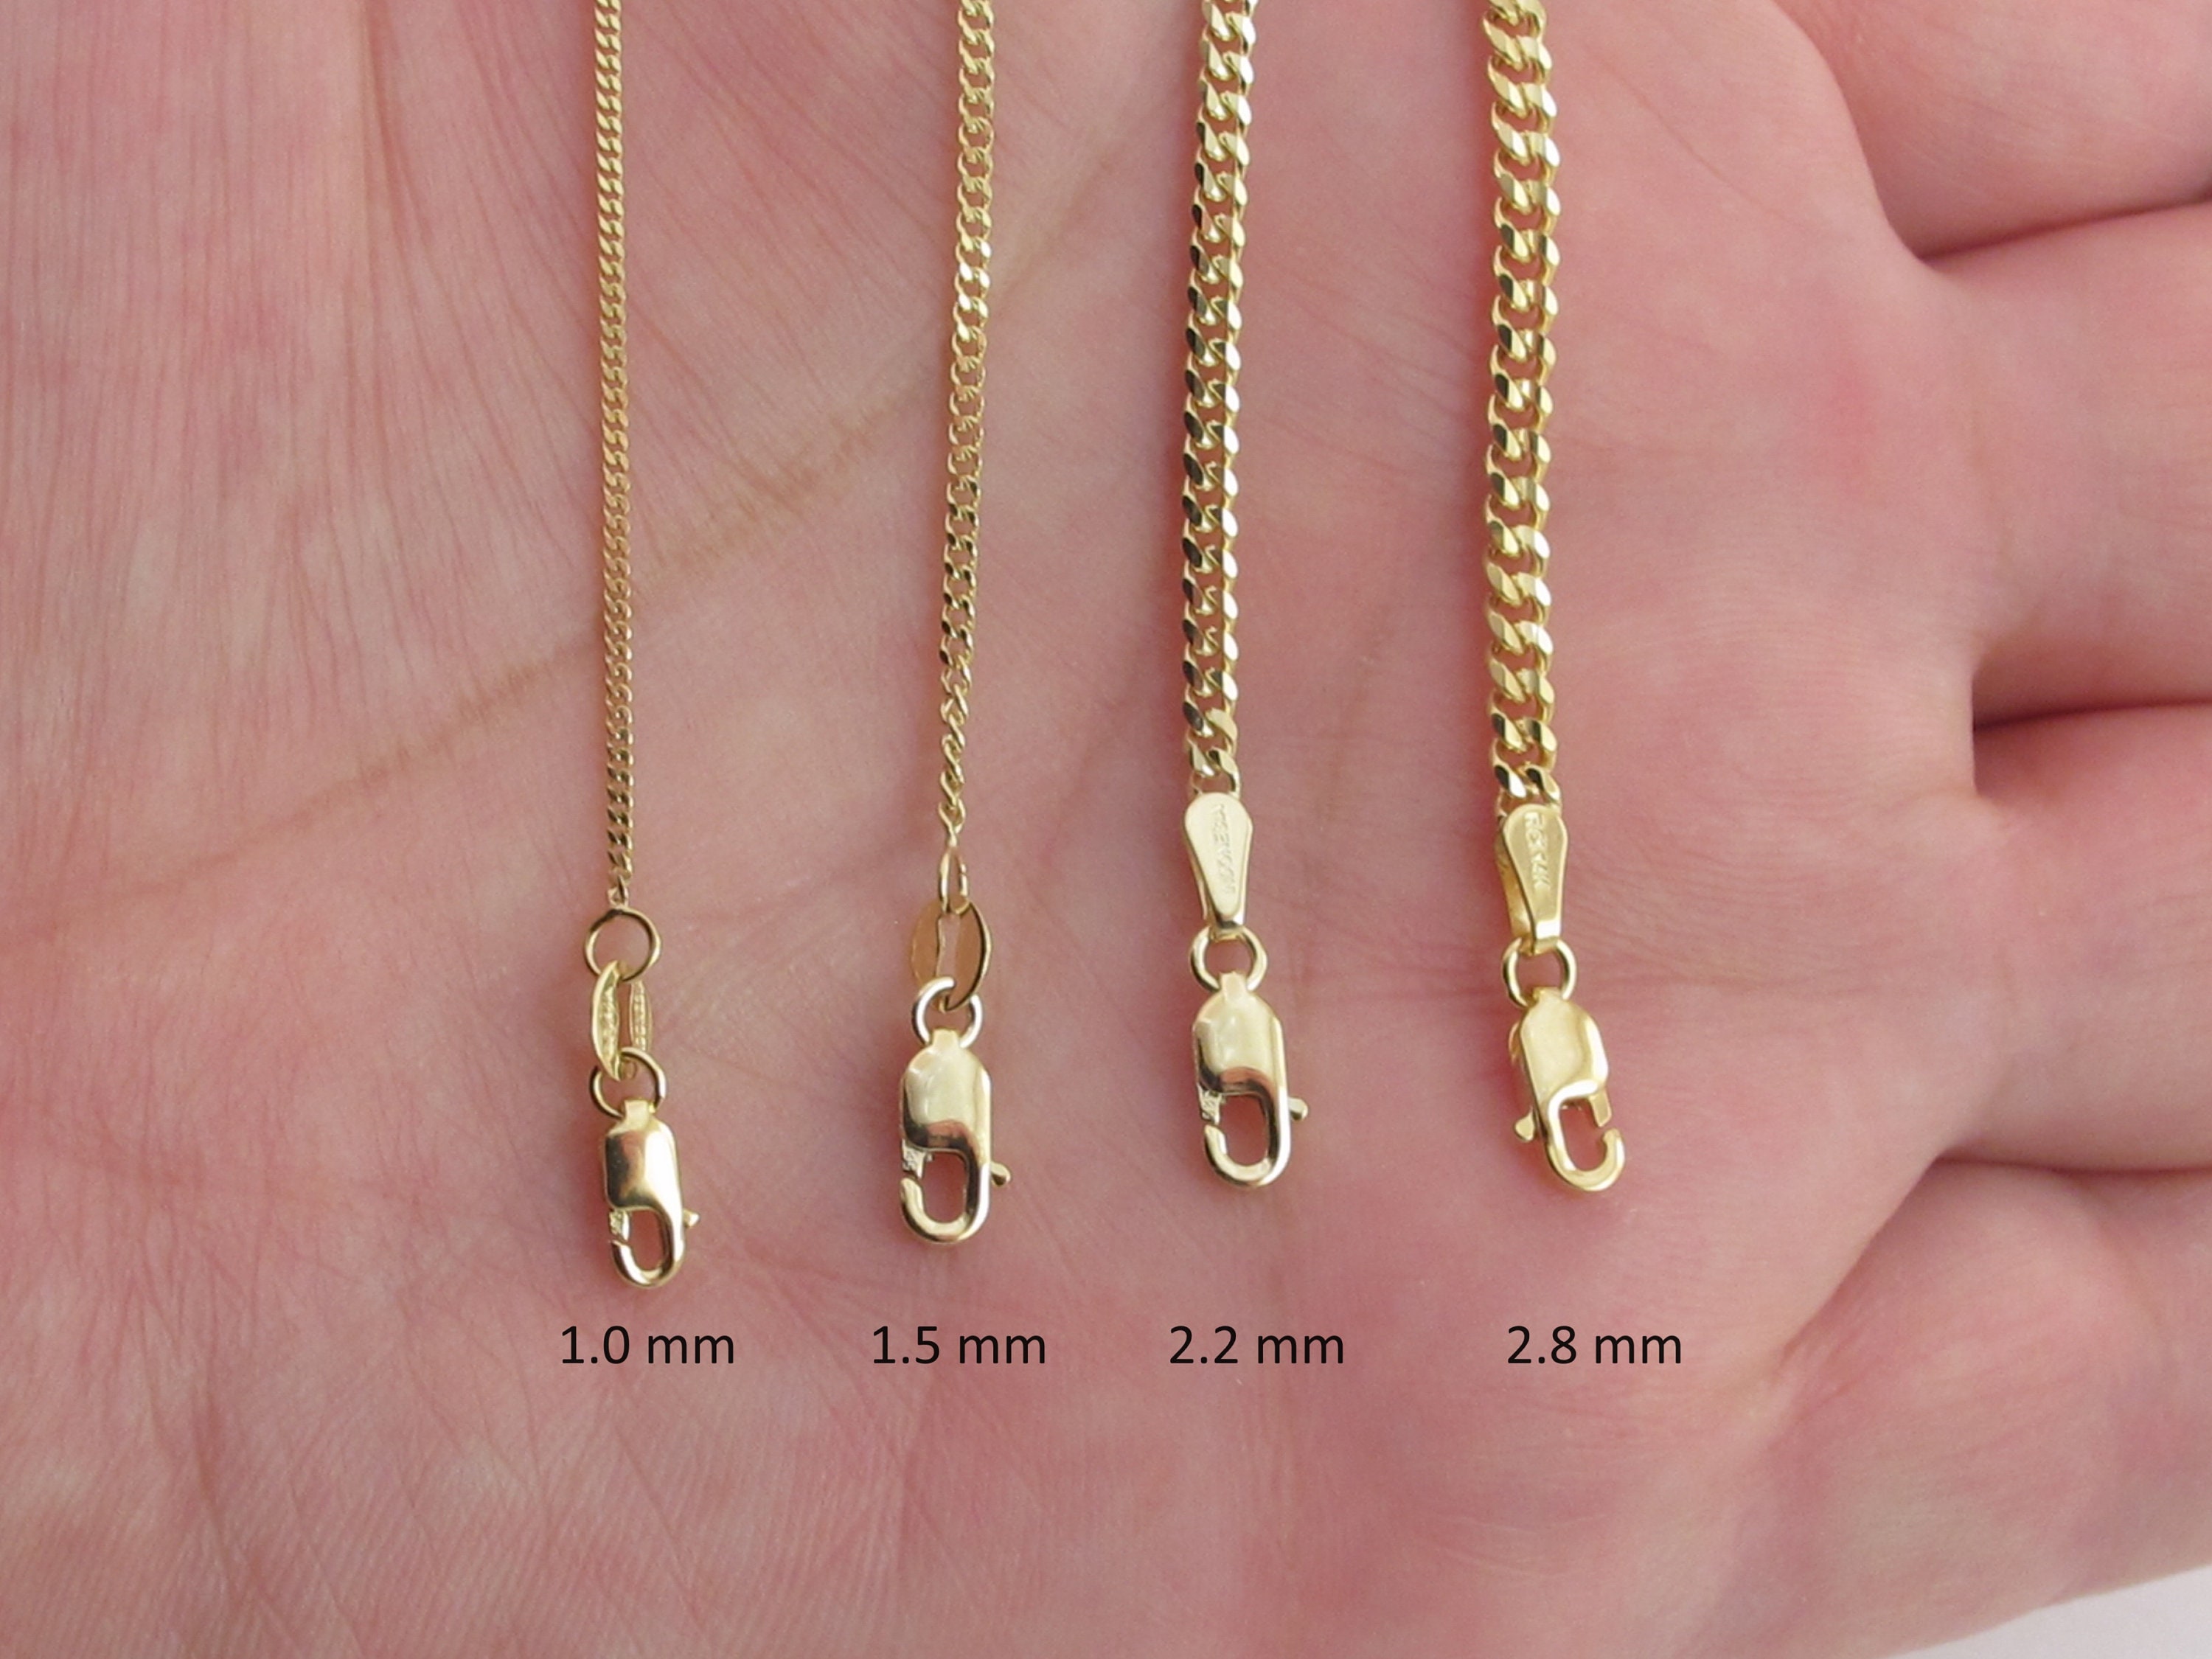  TEHAUX 8 Pcs Lobster Clasp Necklace Clasp Connector Gold Clasp  for Necklace Swivel Clasps Necklace Seperator Lobster Claw Closure Jewelry  Necklace Bracelet Alloy Accessories Toolkit 14k